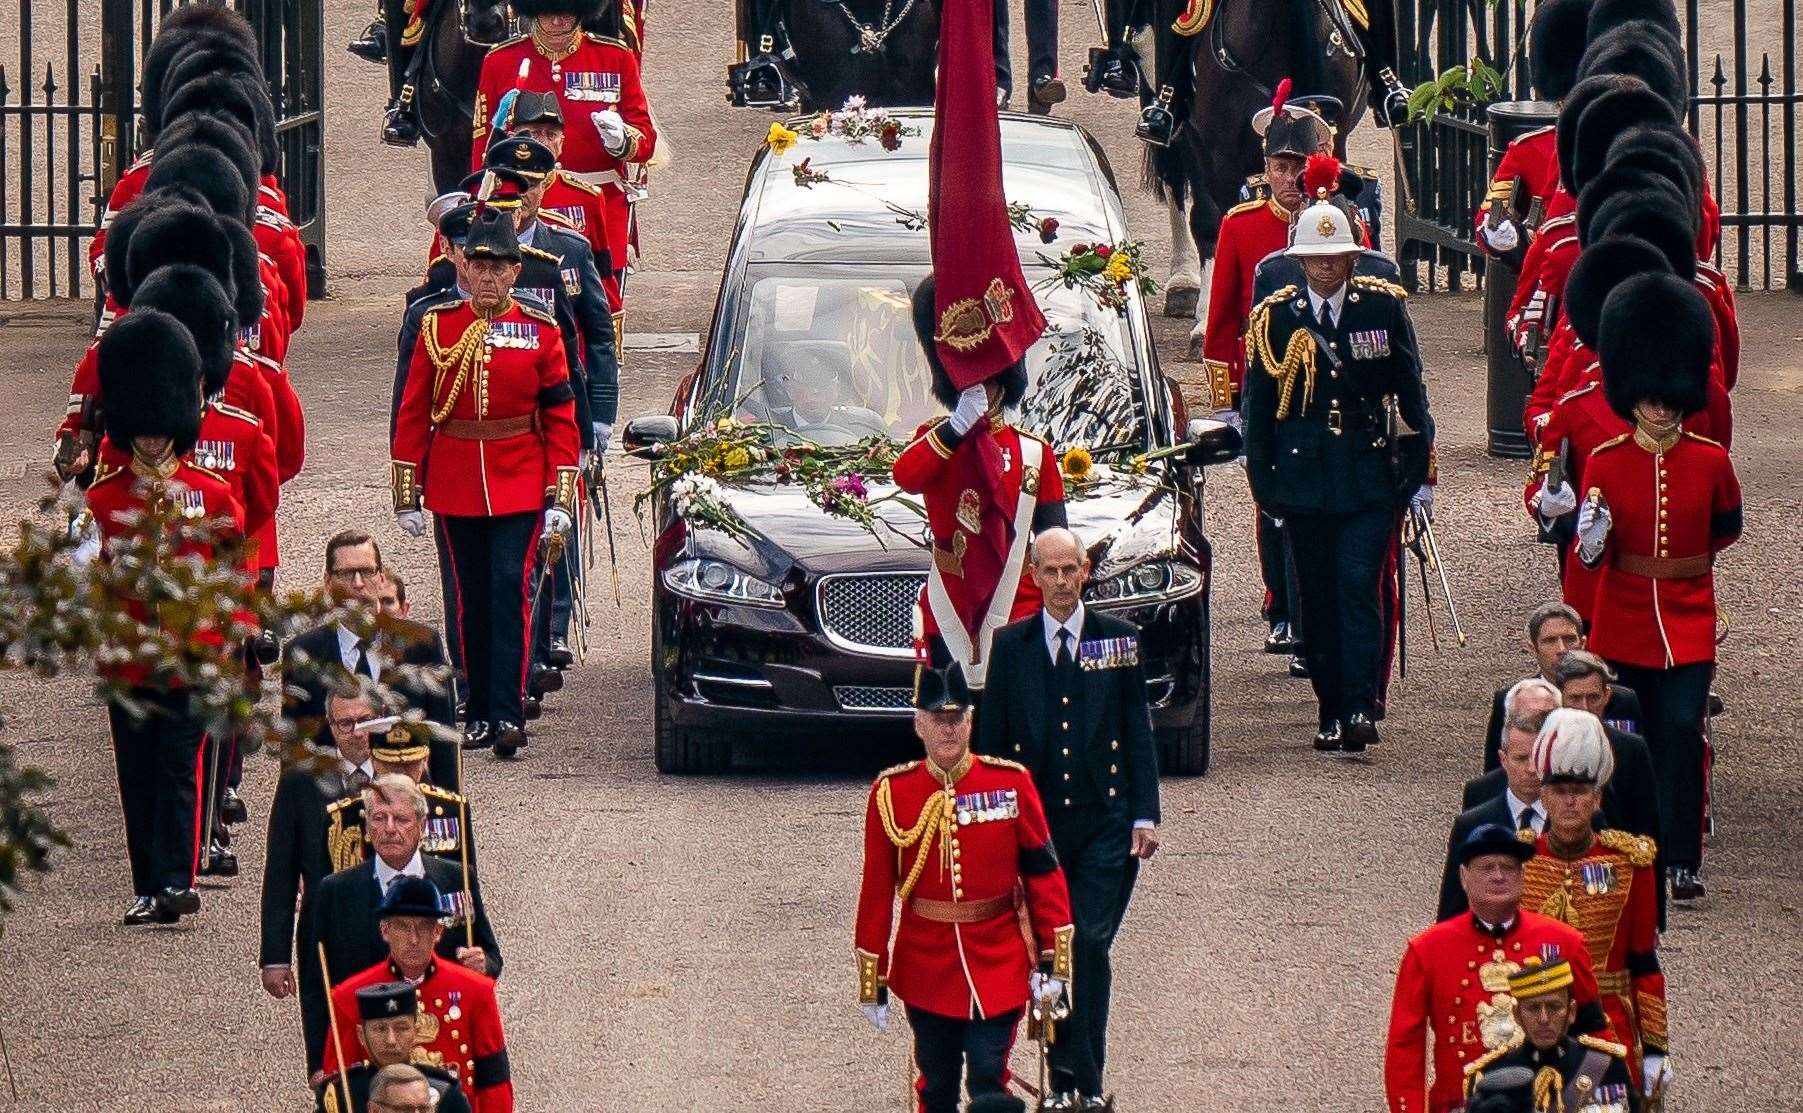 Paul Whybrew (centre) in his black uniform as the State Hearse carried the coffin of Queen Elizabeth II to Windsor Castle (Aaron Chown/PA)